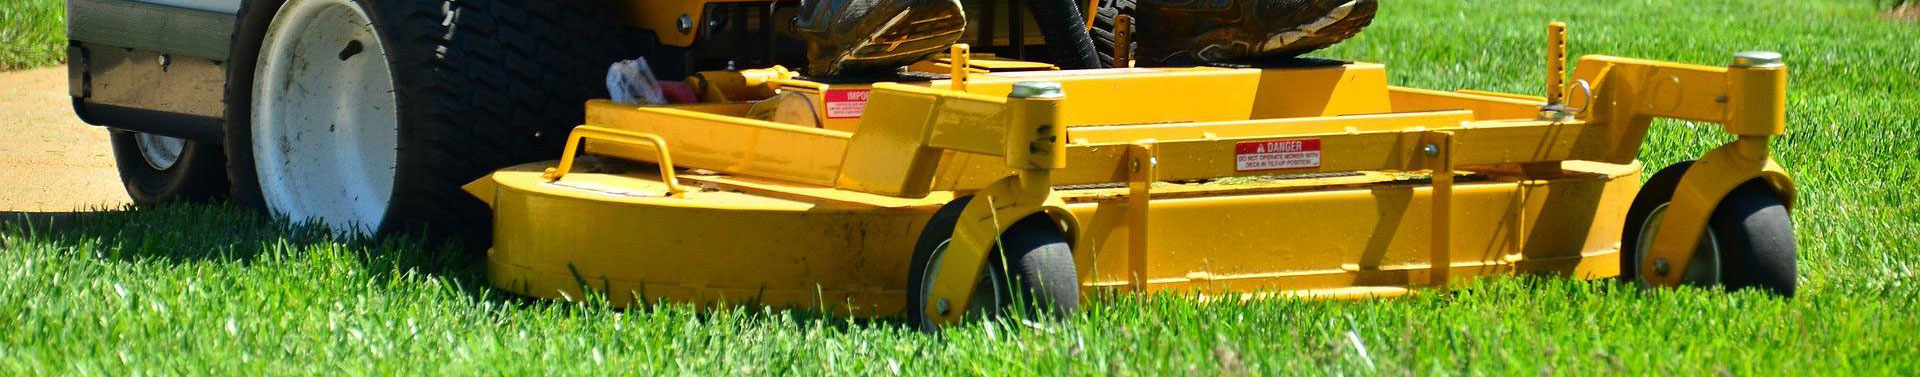 Lawn care services in DC, VA, WV and MD areas